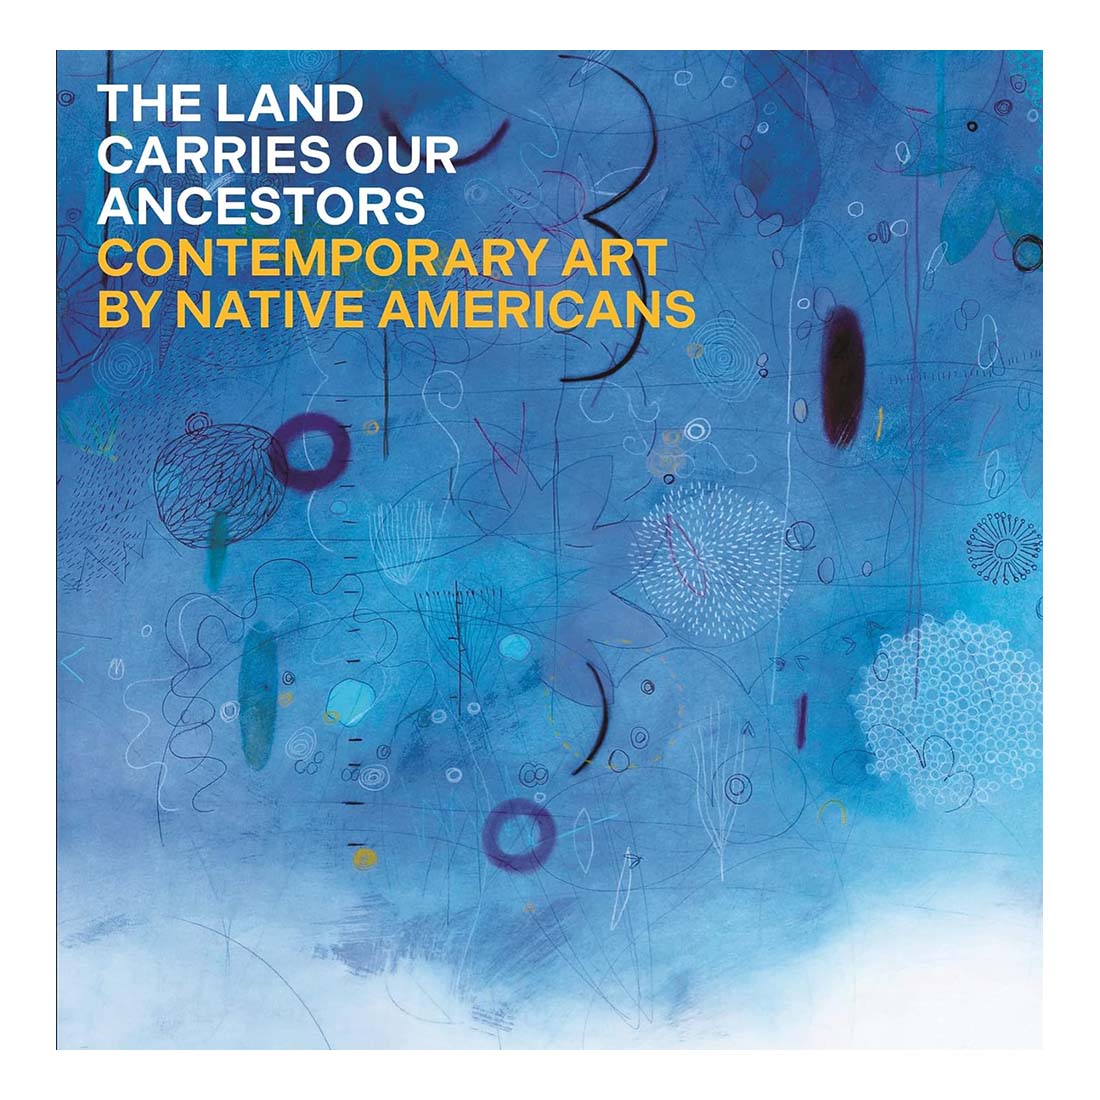 The Land Carries Our Ancestors